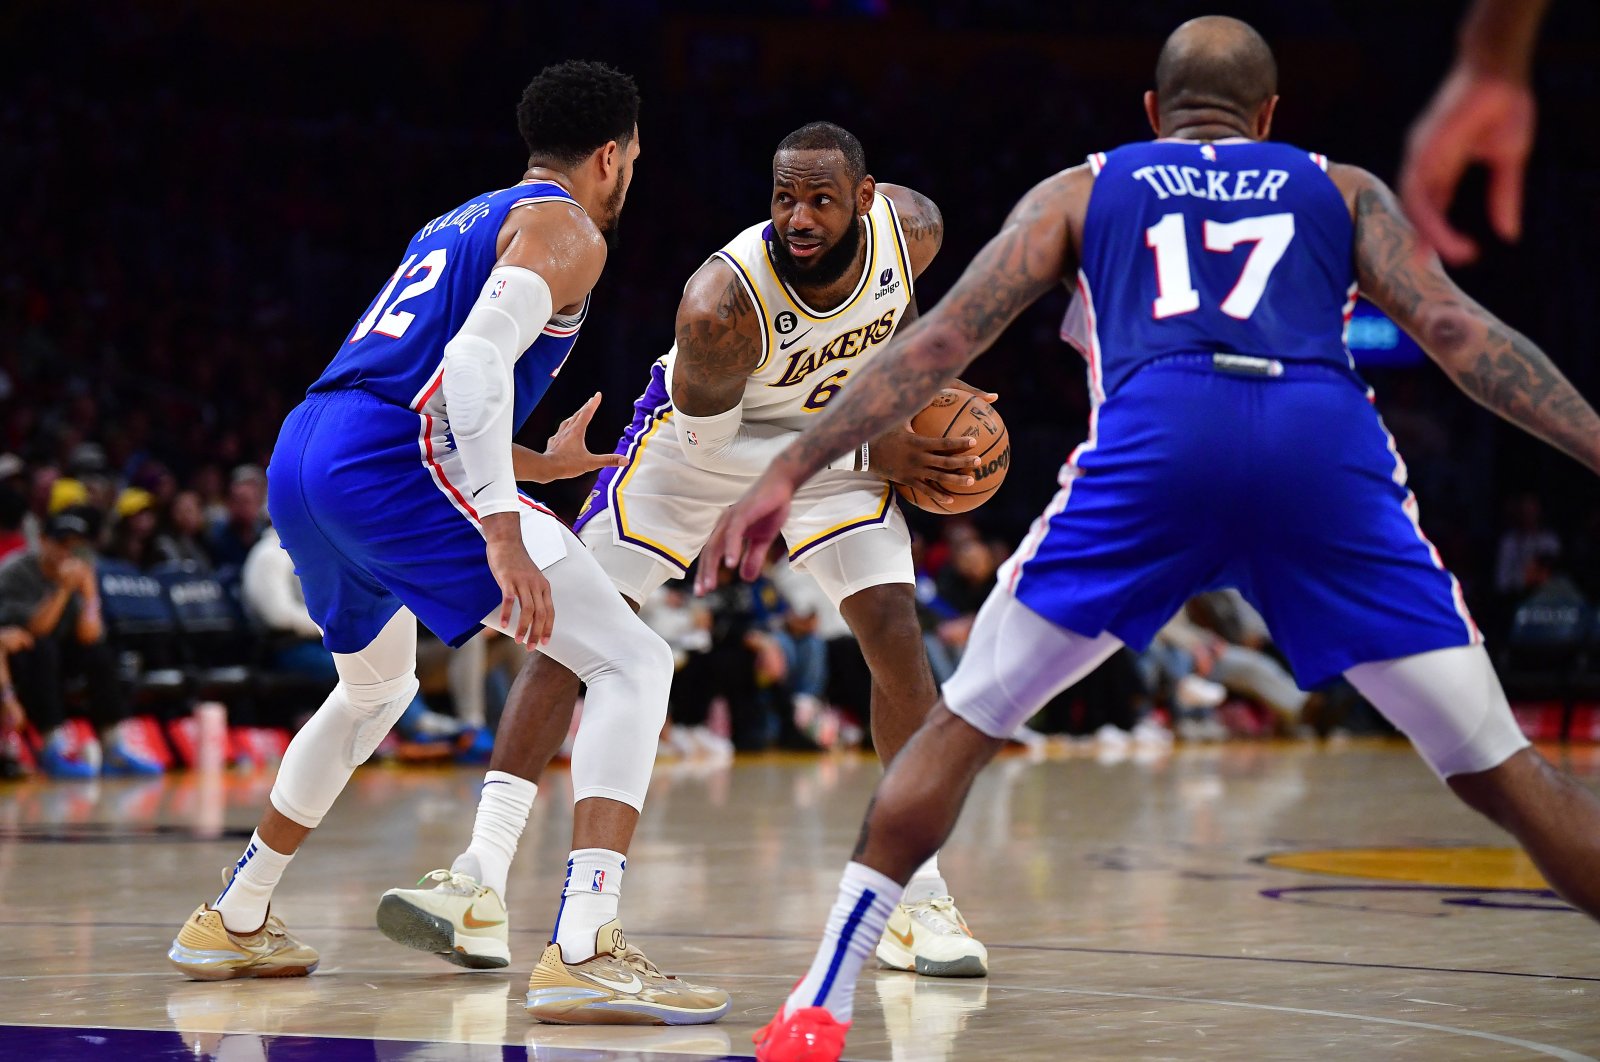 Los Angeles Lakers forward LeBron James (C) controls the ball against Philadelphia 76ers forward Tobias Harris (L) and forward P.J. Tucker (R) during the second half at Crypto.com Arena, Los Angeles, California, USA, Jan 15, 2023. (Reuters Photo)